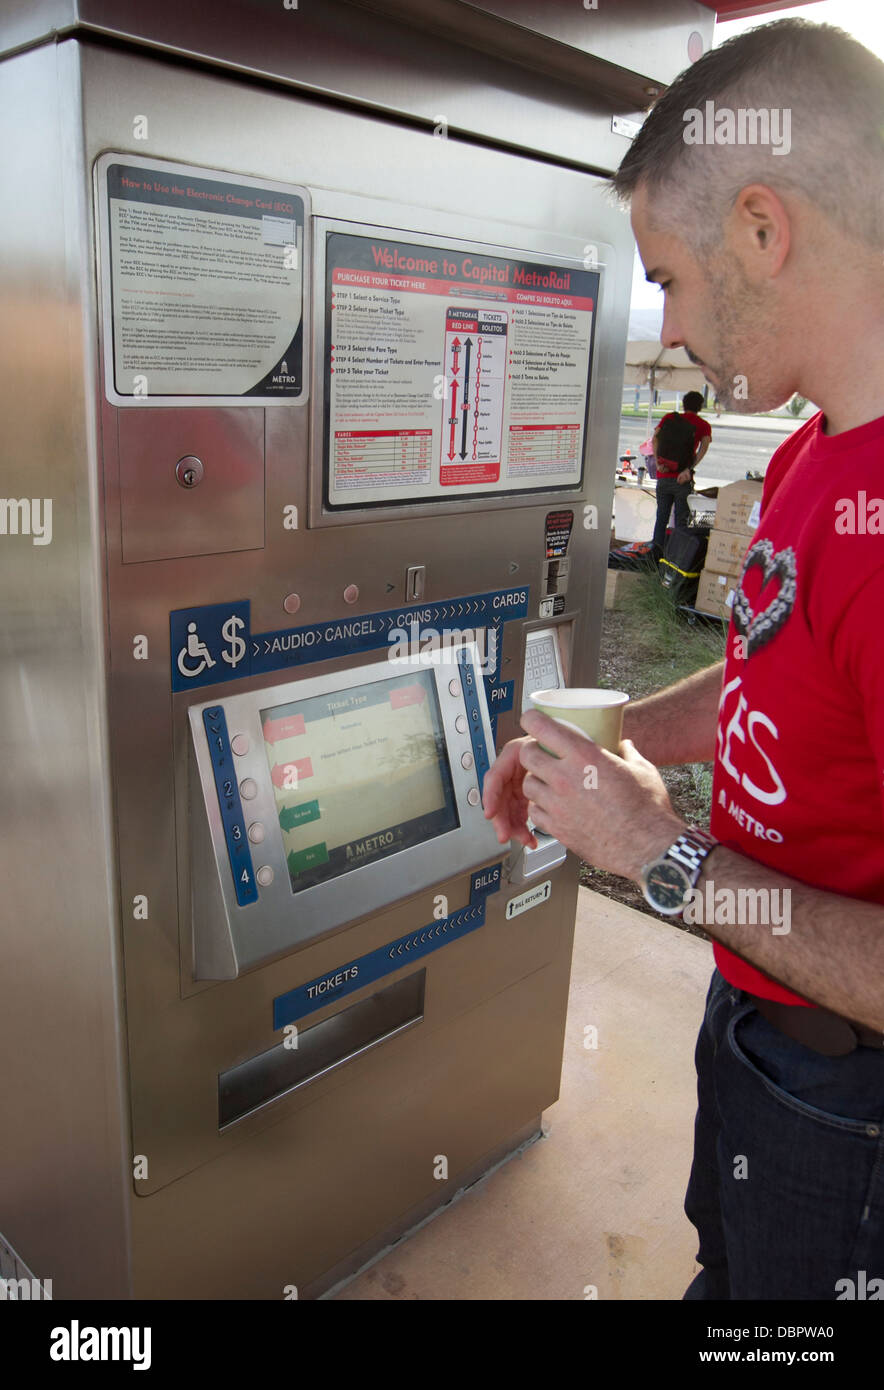 Morning commuter uses the Metro-Rail ticket payment kiosk at public transportation stations in Austin, Texas Stock Photo